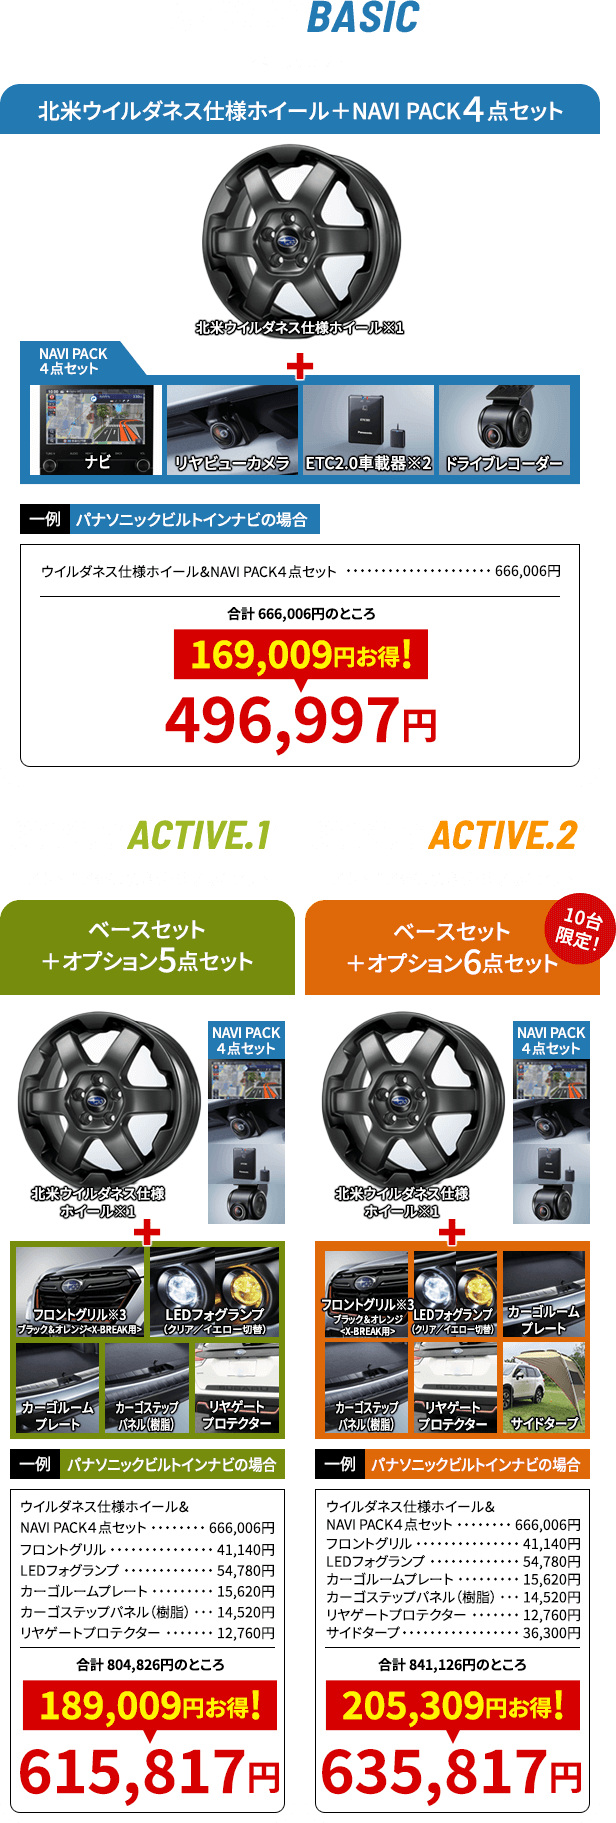 STYLE BASIC STYLE ACTIVE.1 STYLE ACTIVE.2 